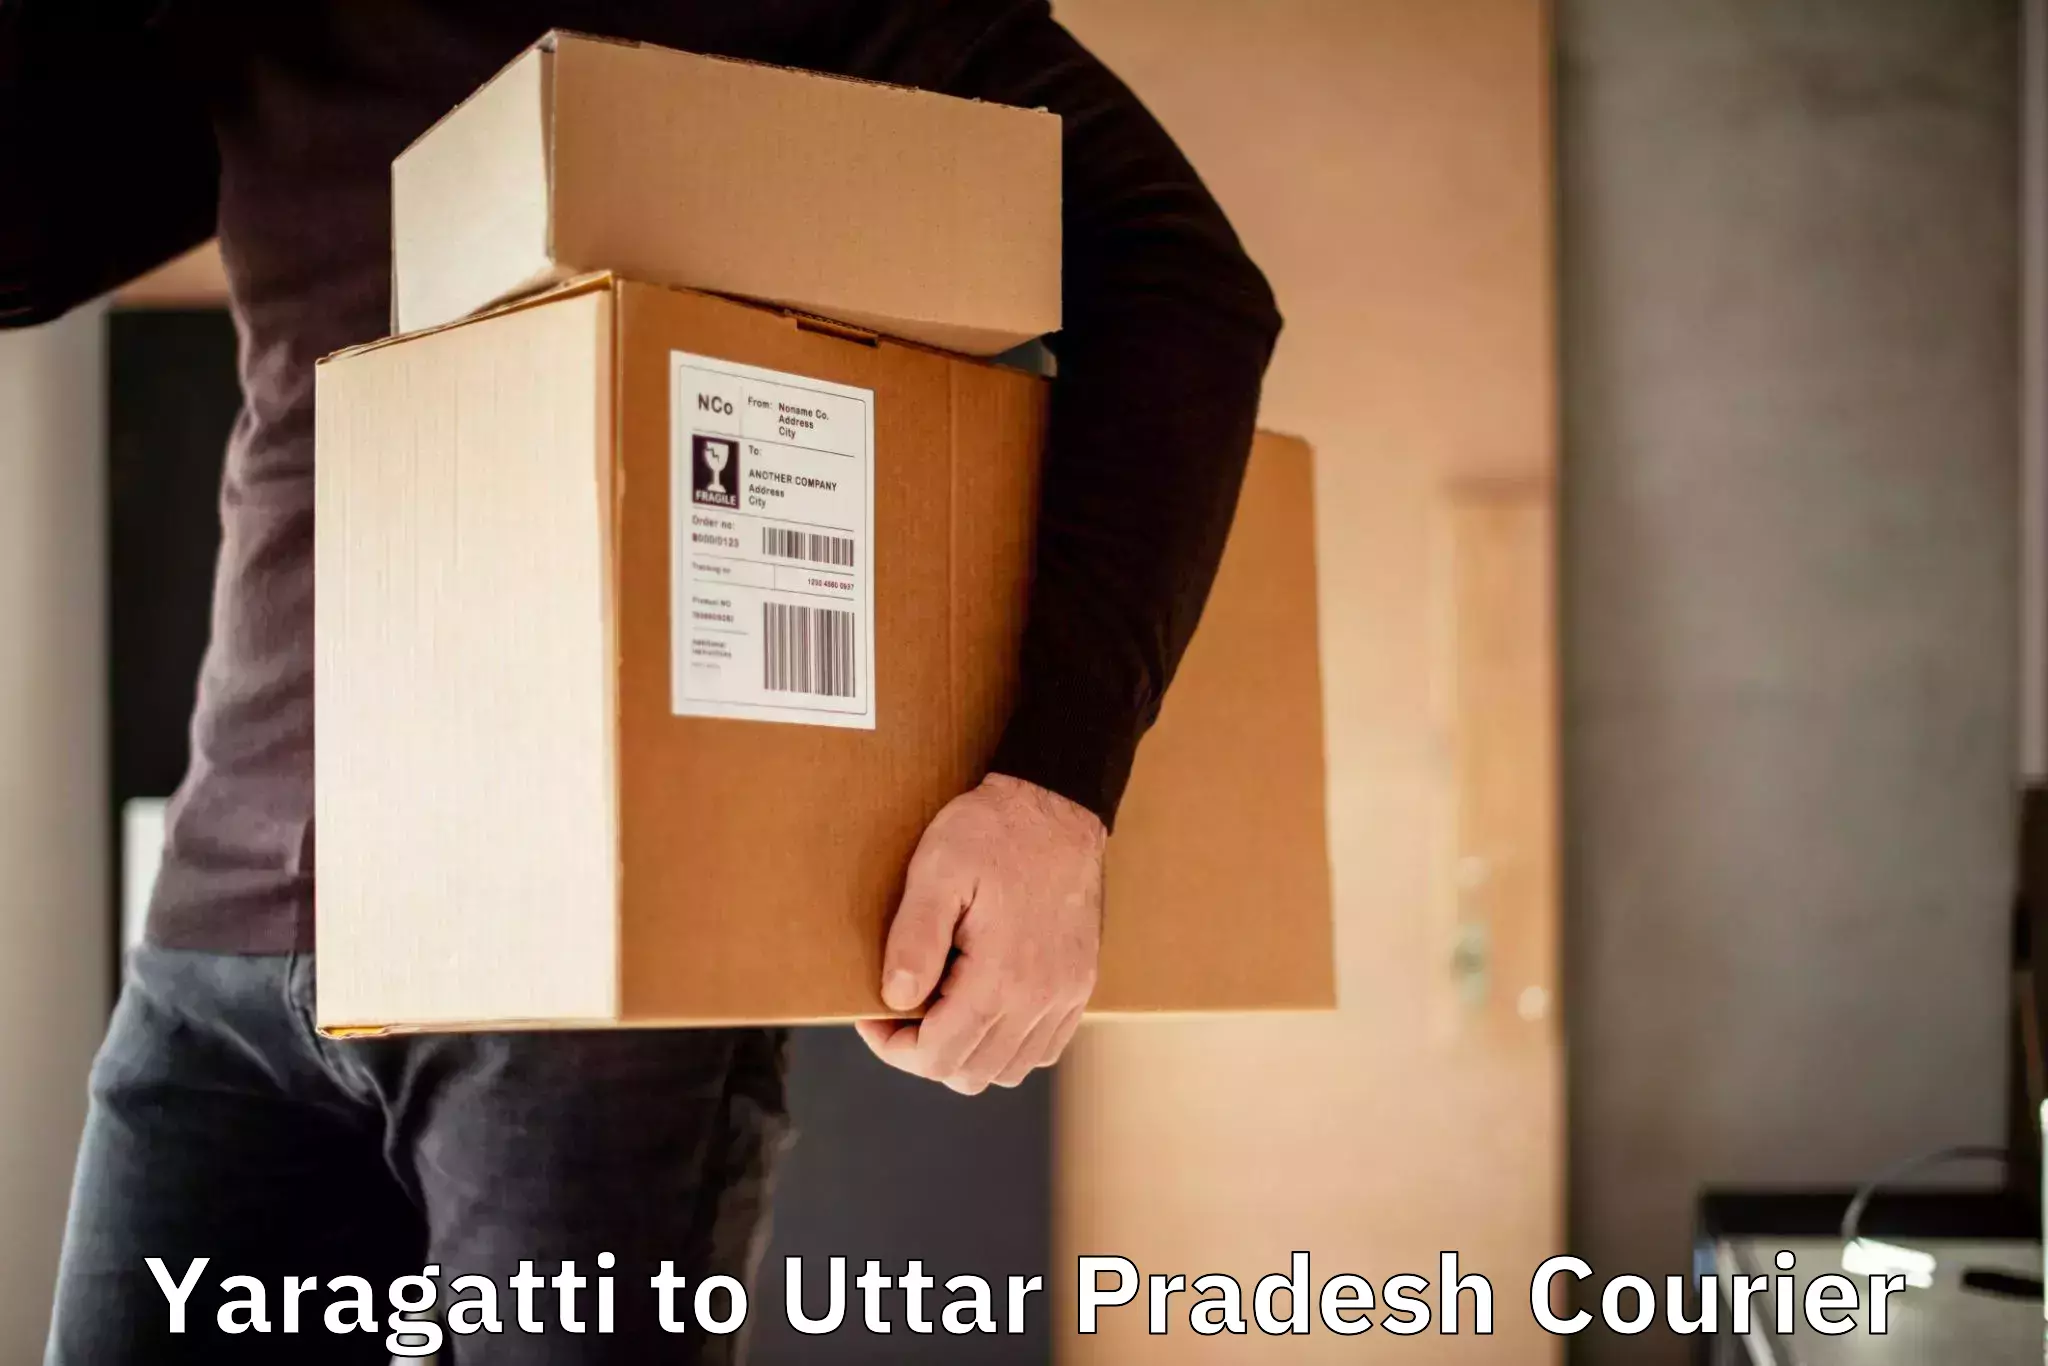 Efficient courier operations Yaragatti to Dhaurahara